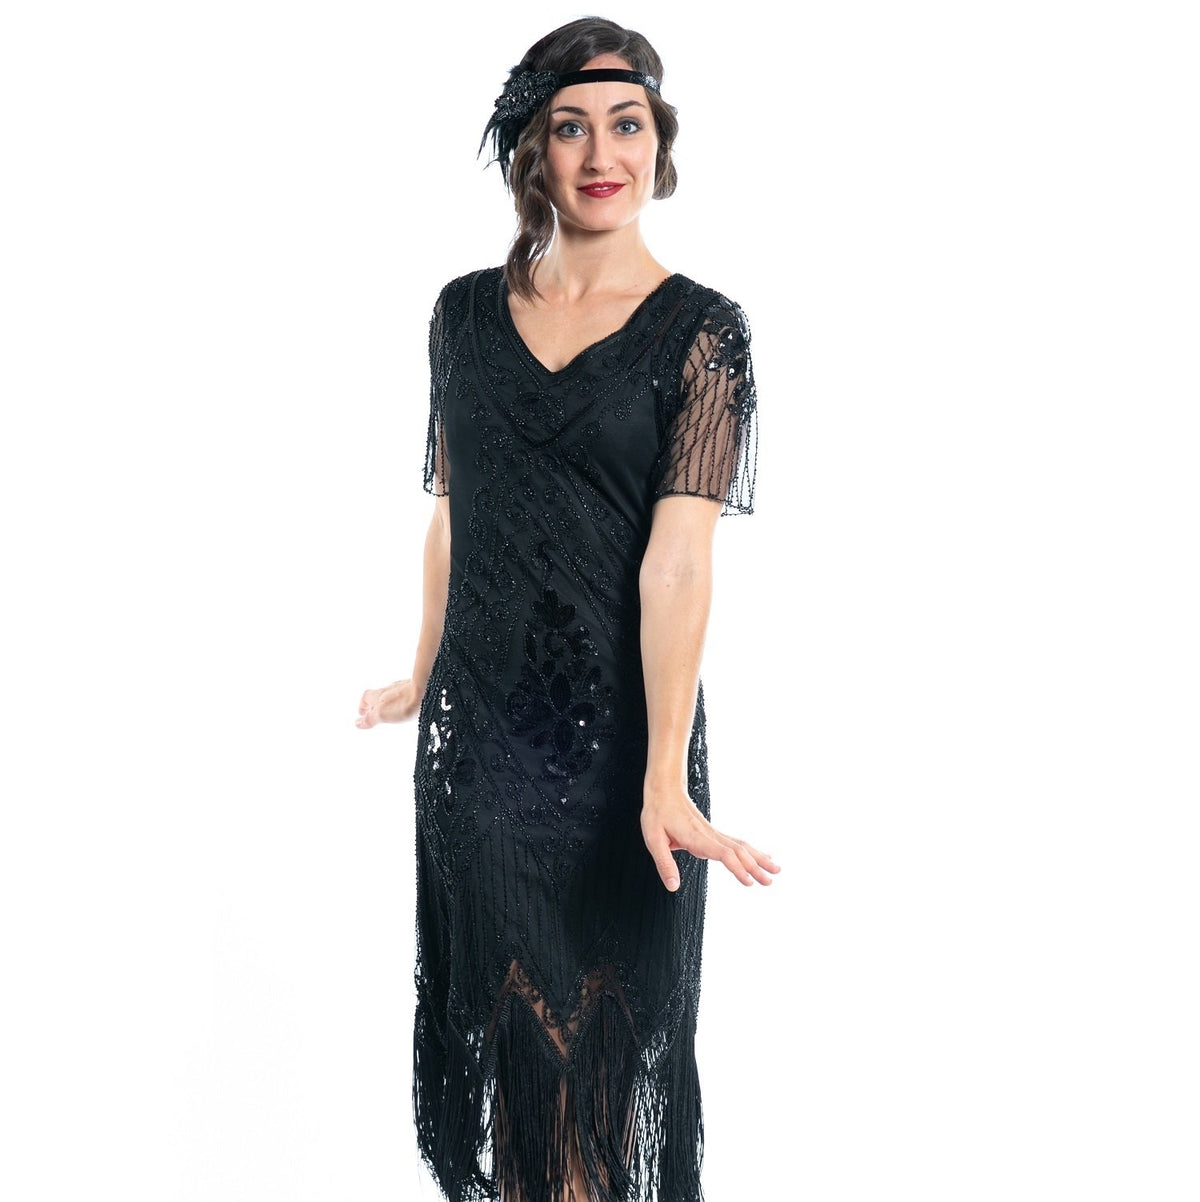 A Vintage Black Flapper Dress with beads and short sleeves